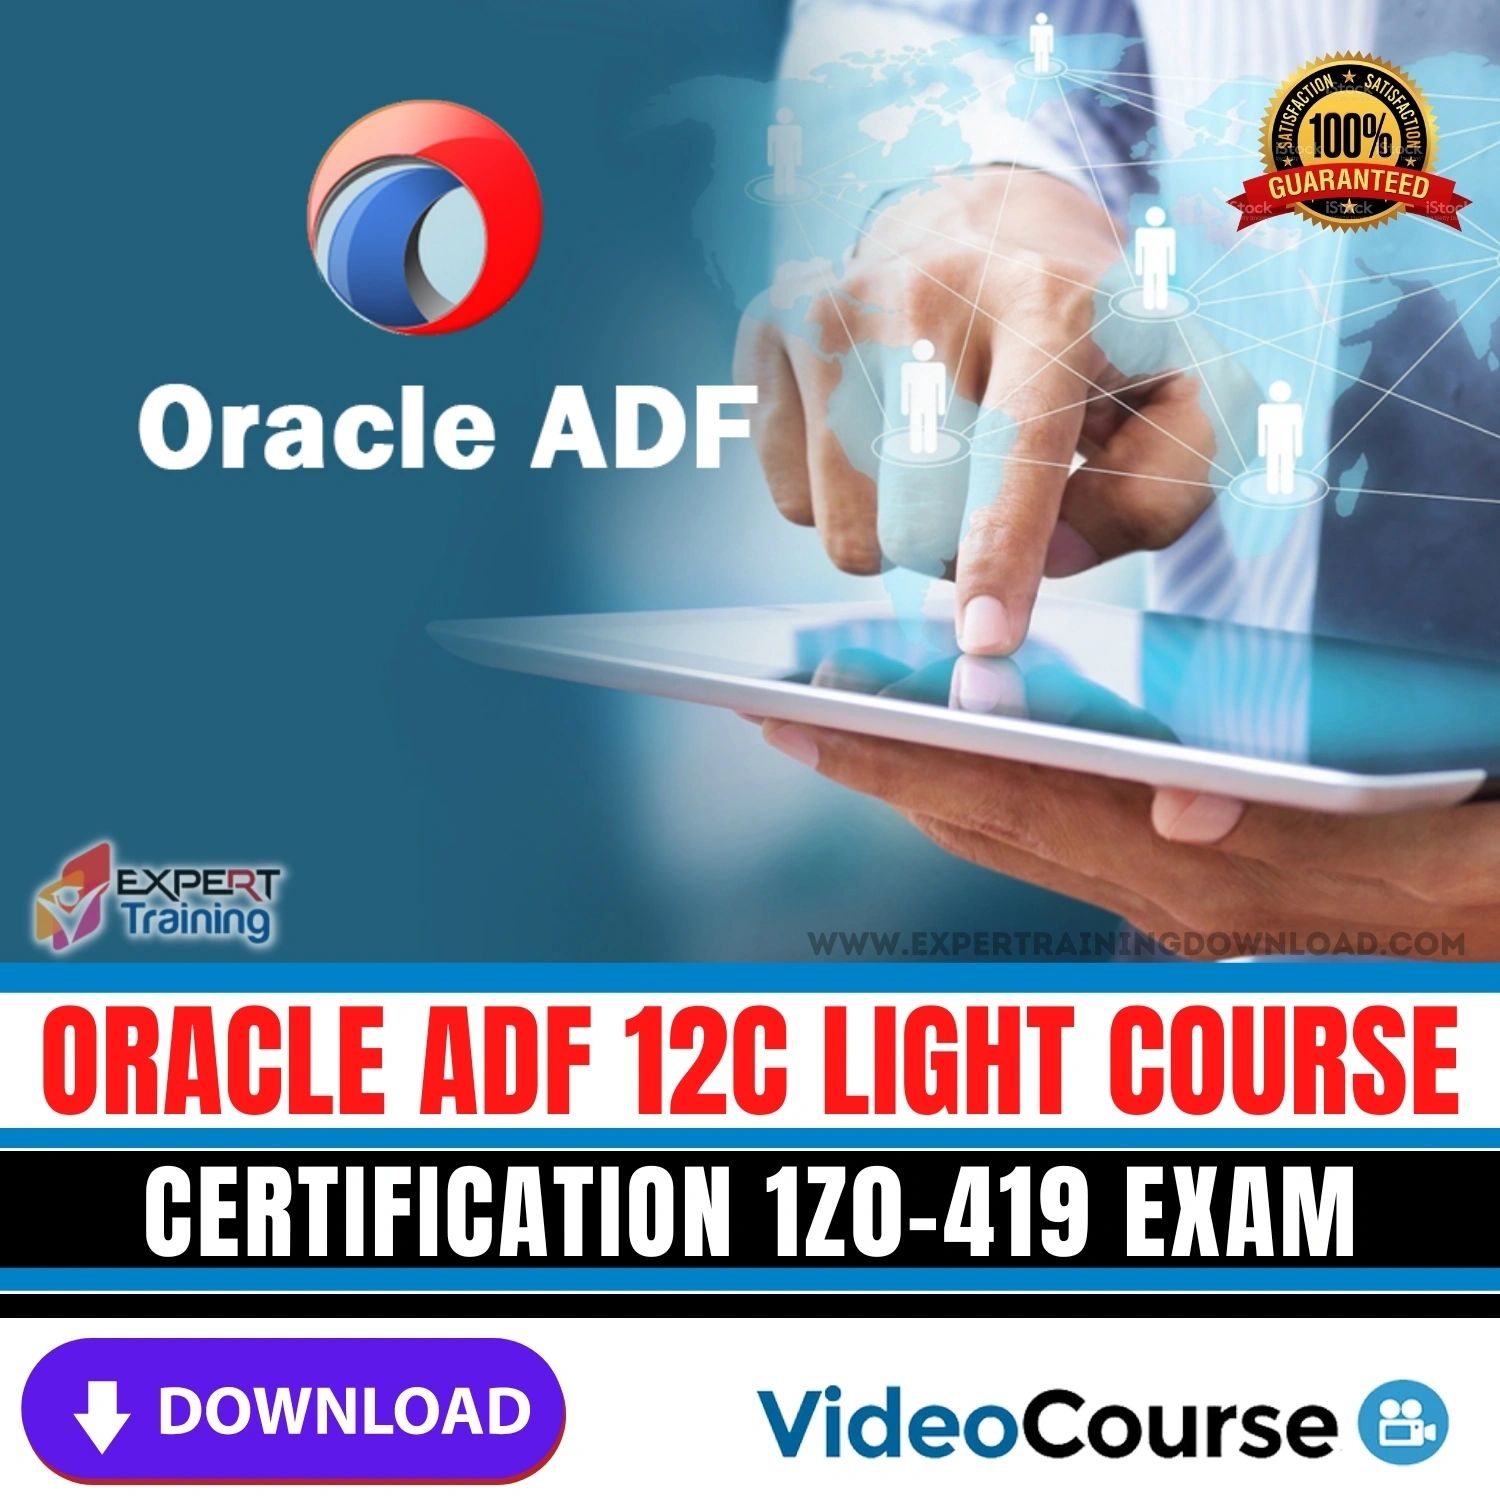 Oracle ADF 12c Light Course for Certification 1Z0-419 Exam